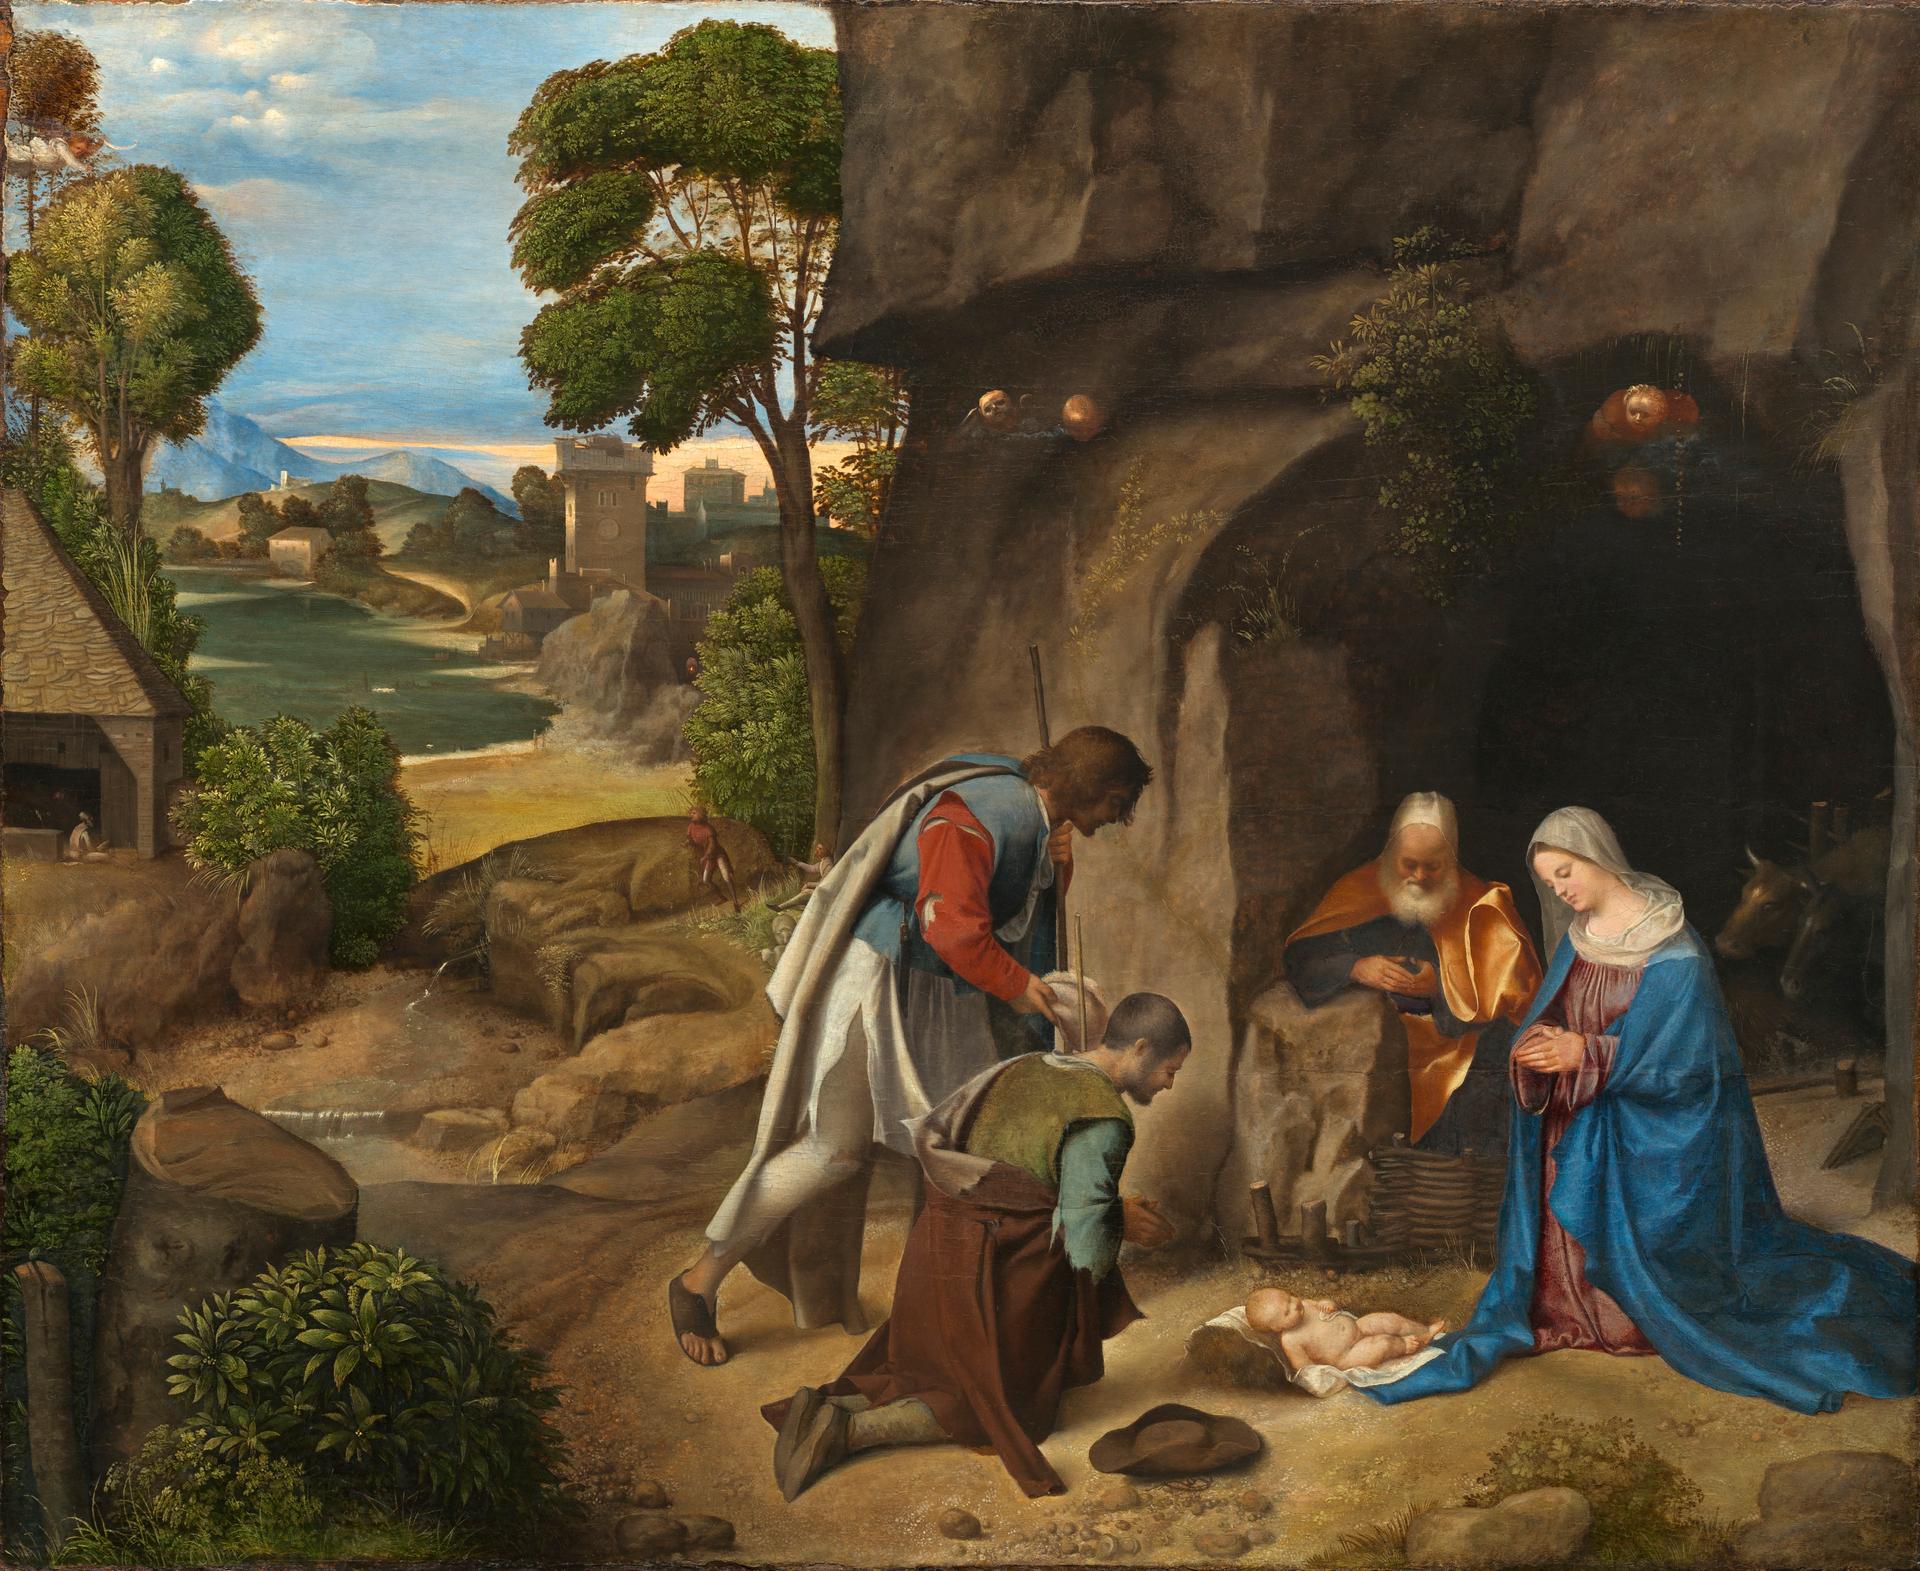 Did Mary give birth in a cave?